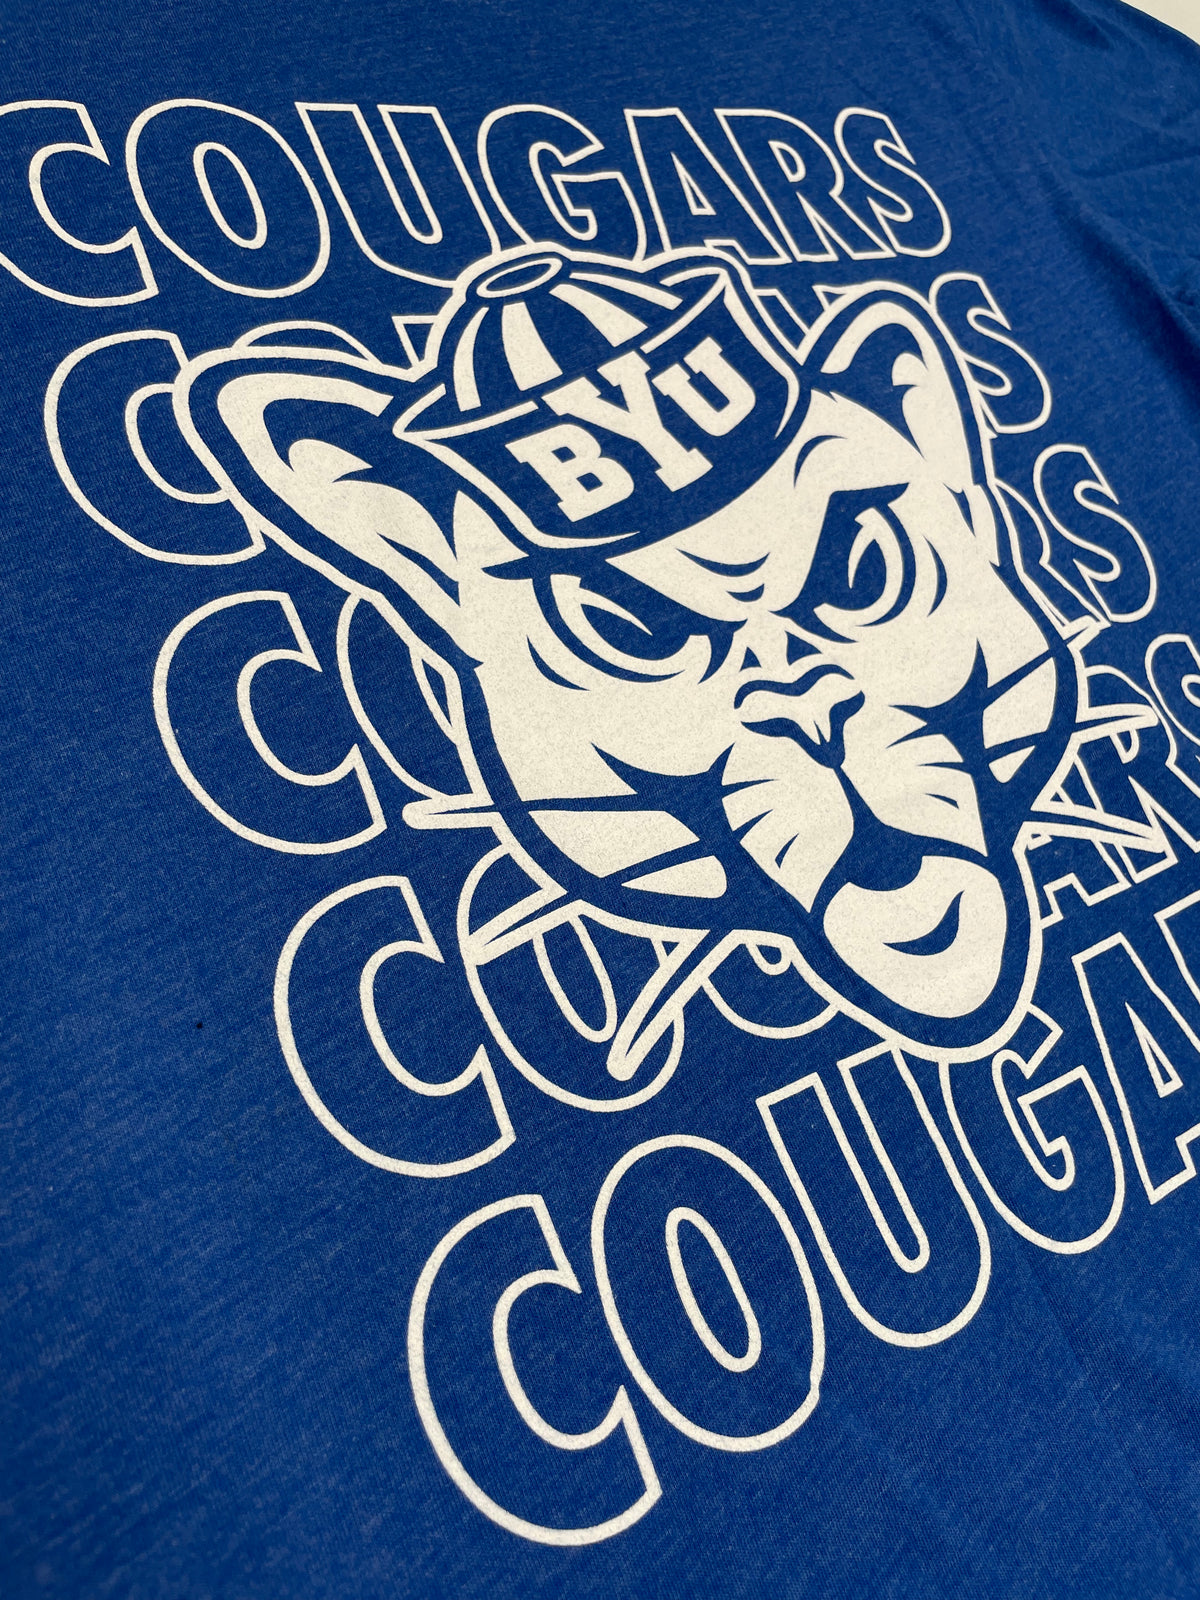 Stacked Sailor Cougar on Cougars T-Shirt